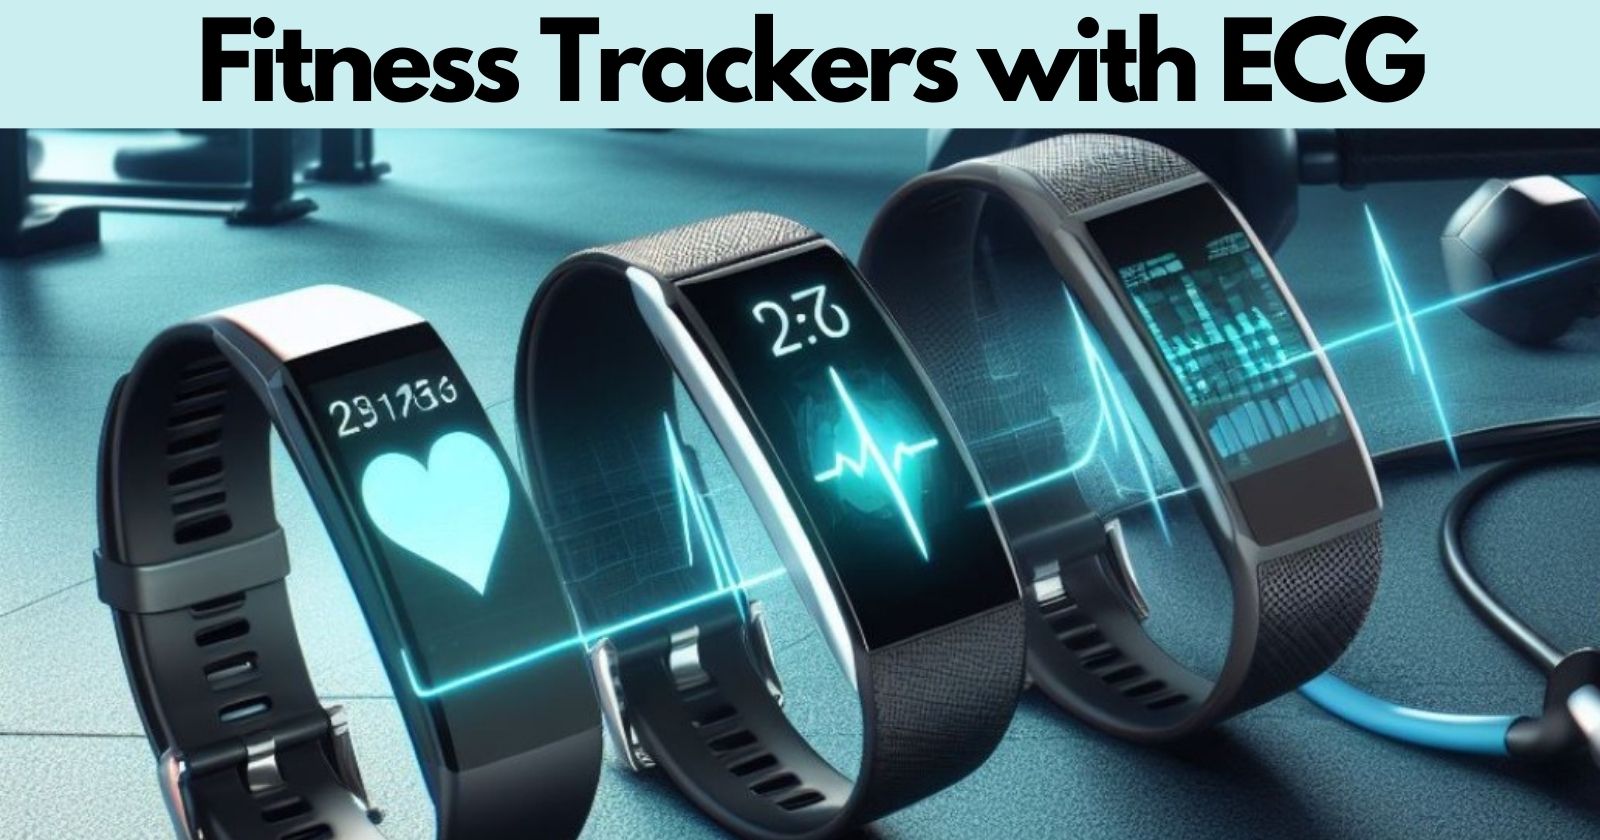 Fitness Trackers with ECG